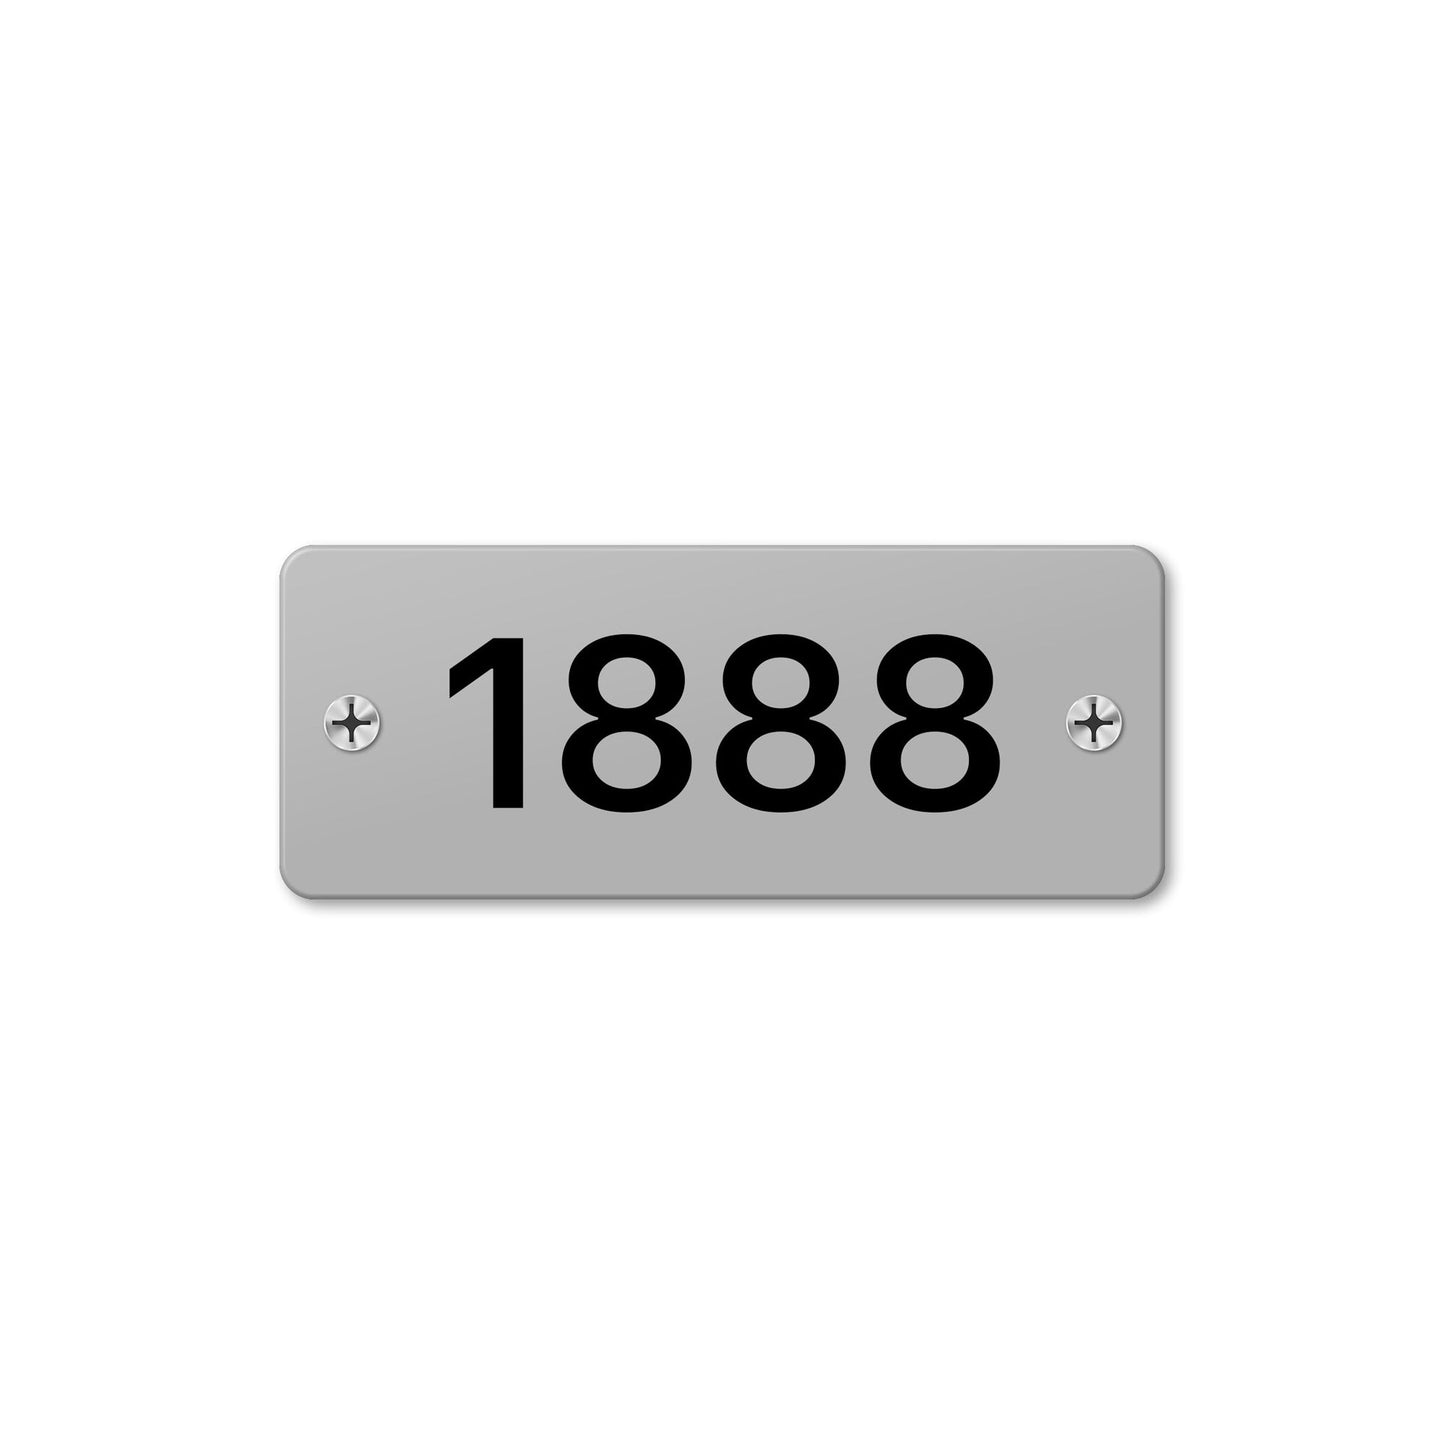 Numeral 1888